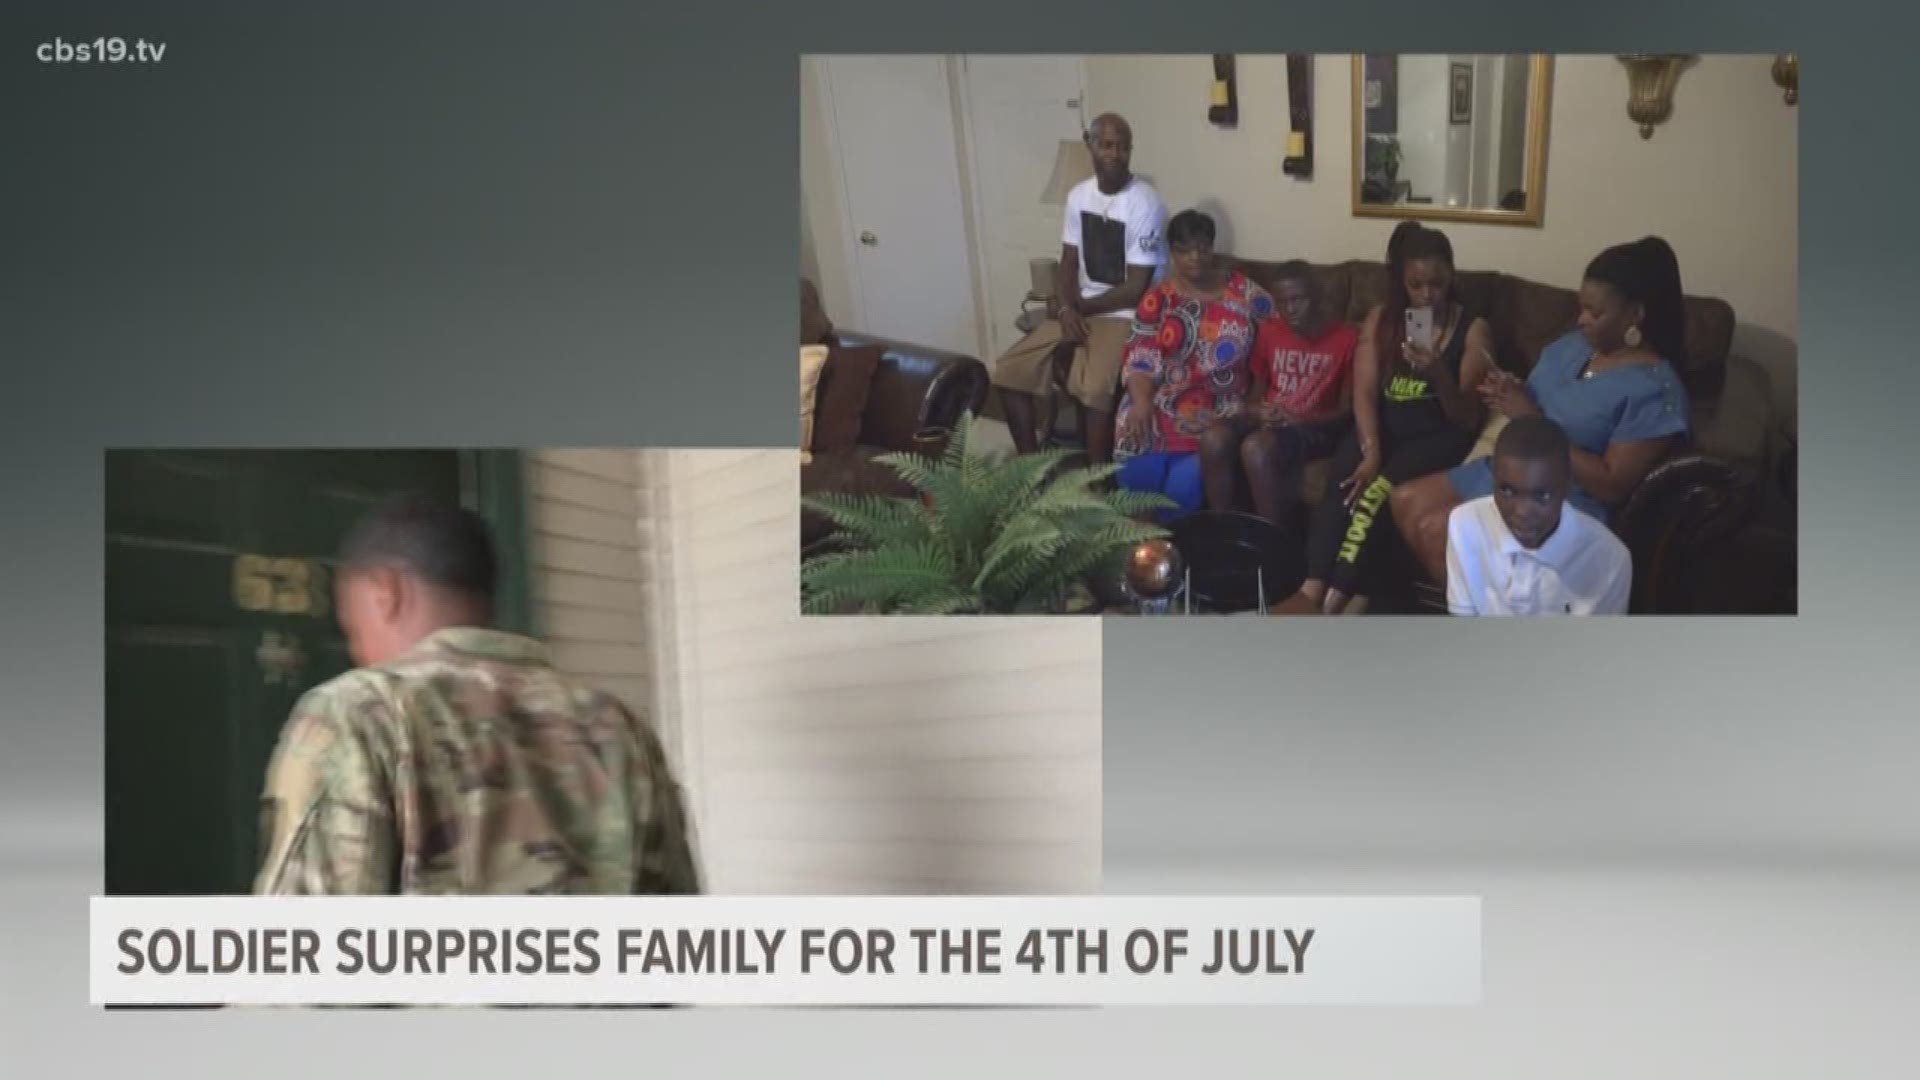 Military surprise: a soldier comes home